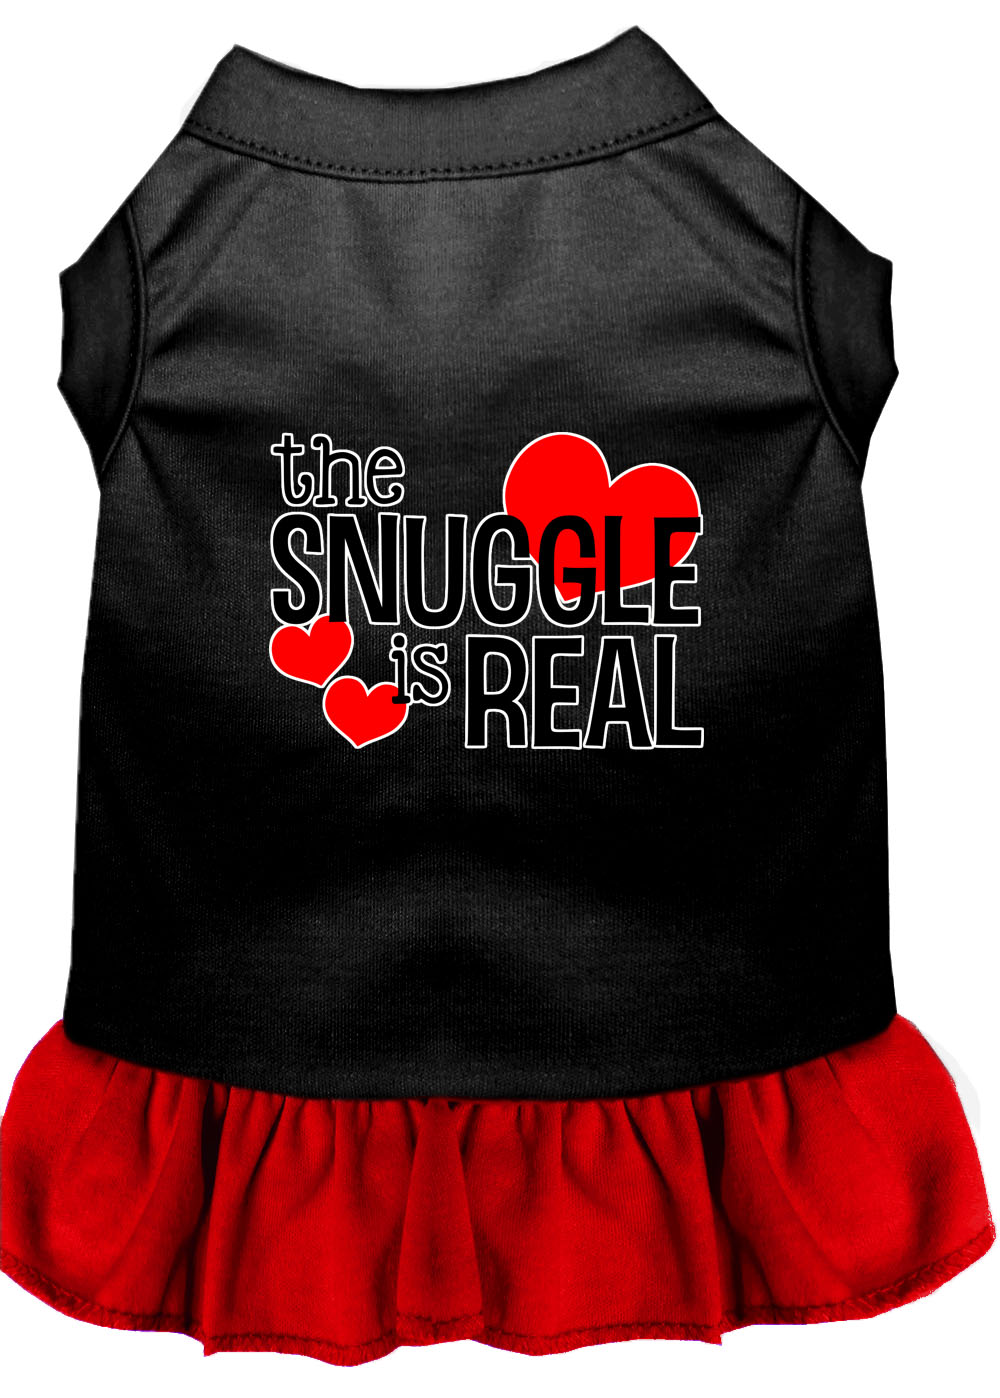 The Snuggle is Real Screen Print Dog Dress Black with Red XL